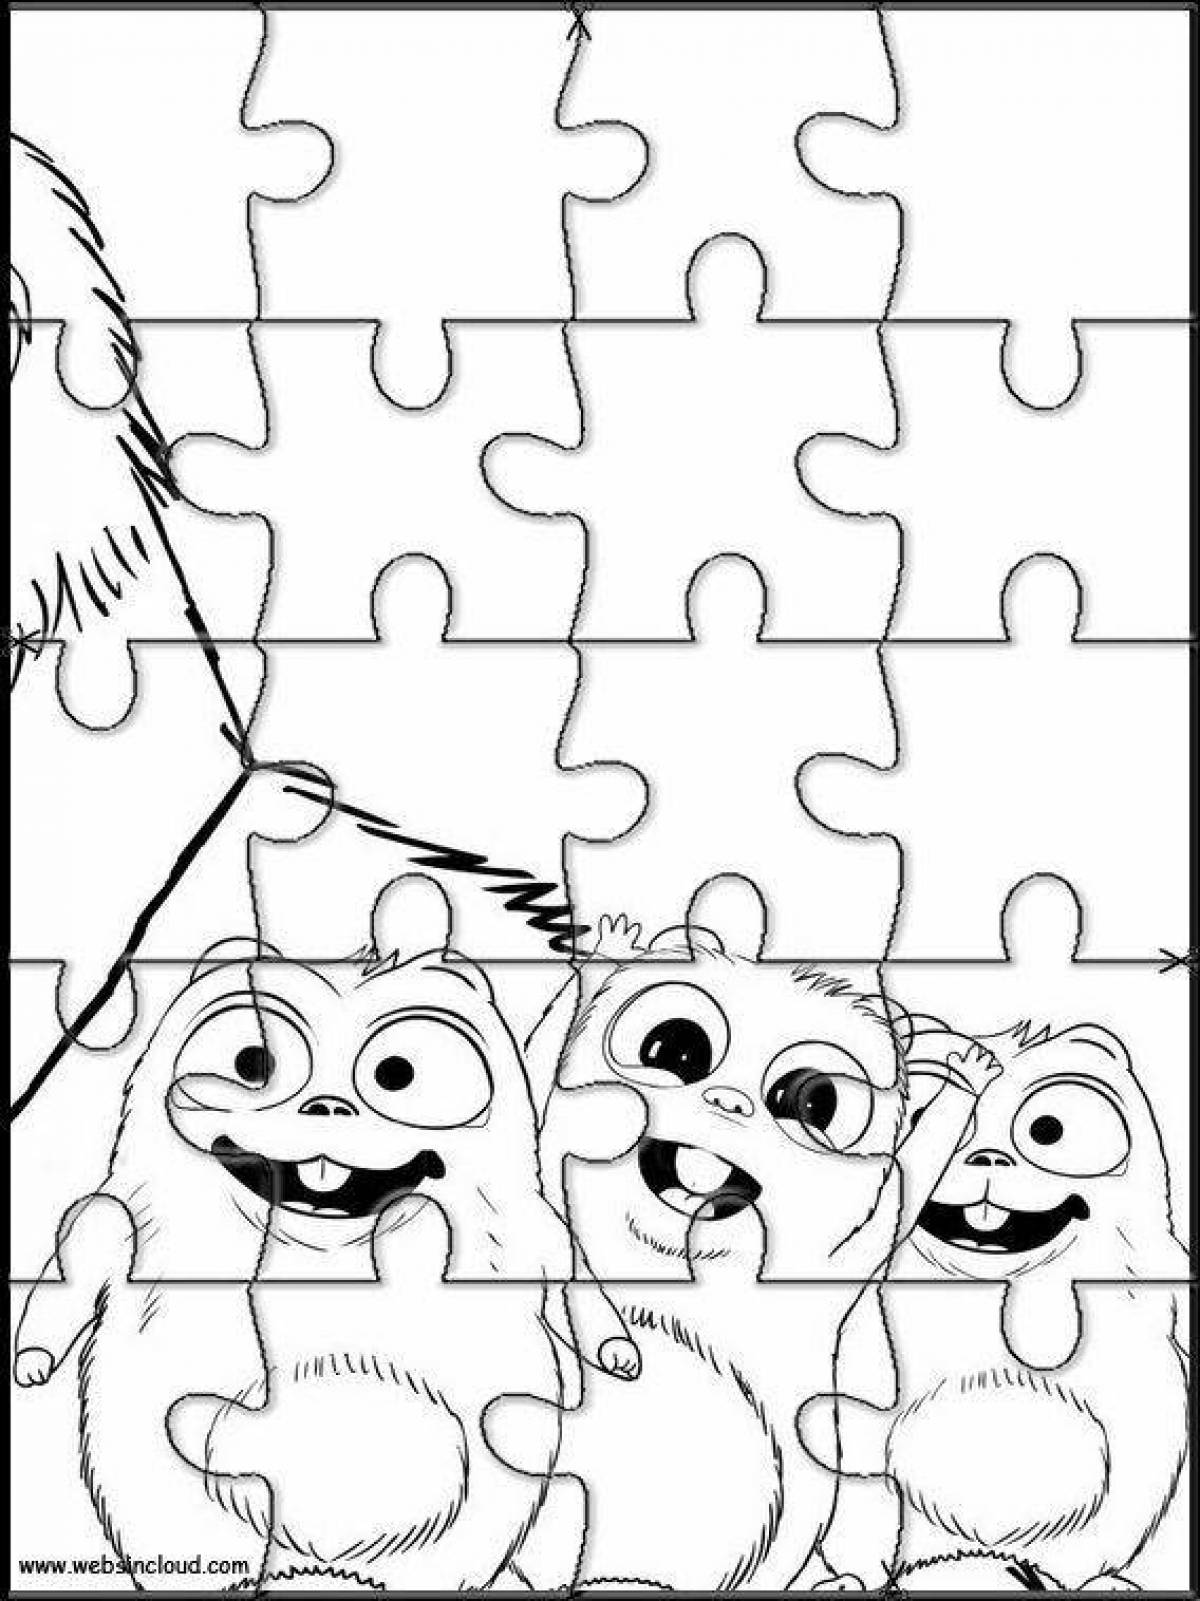 Coloring page joyful grizzlies and lemmings